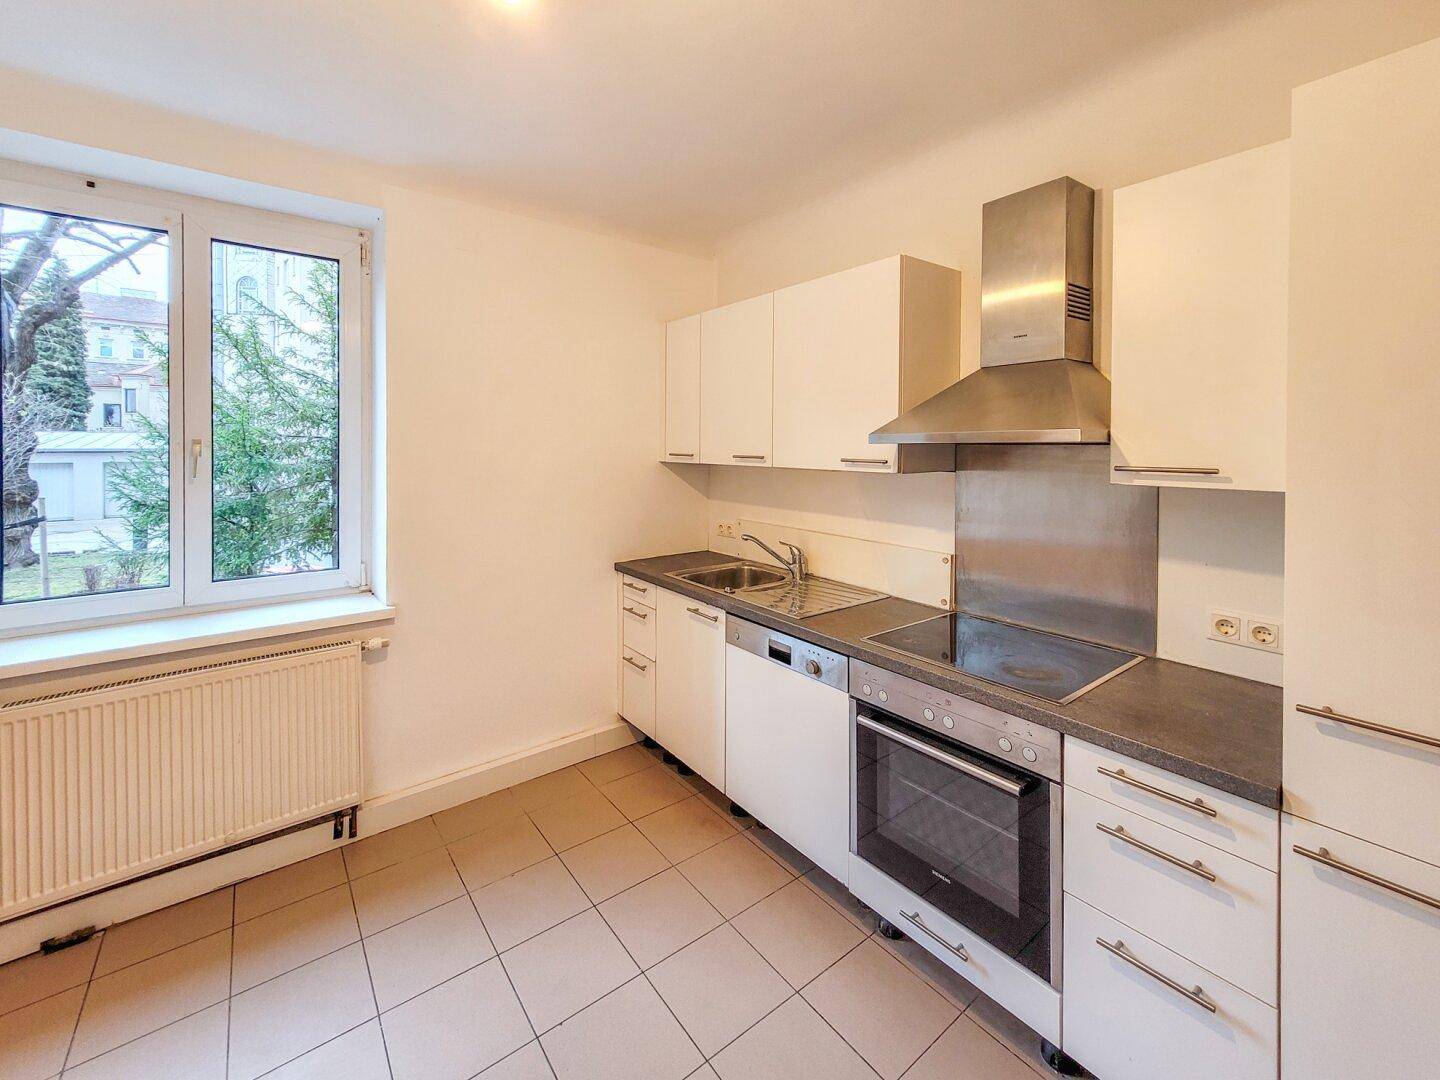 https://pictures.immobilienscout24.de/prod.www.immobilienscout24.at/pictureserver/loadPicture?q=70&id=012.0012000001E84dk-1710100475-fd35a1f6aa884767a962cb5faaa9adcd